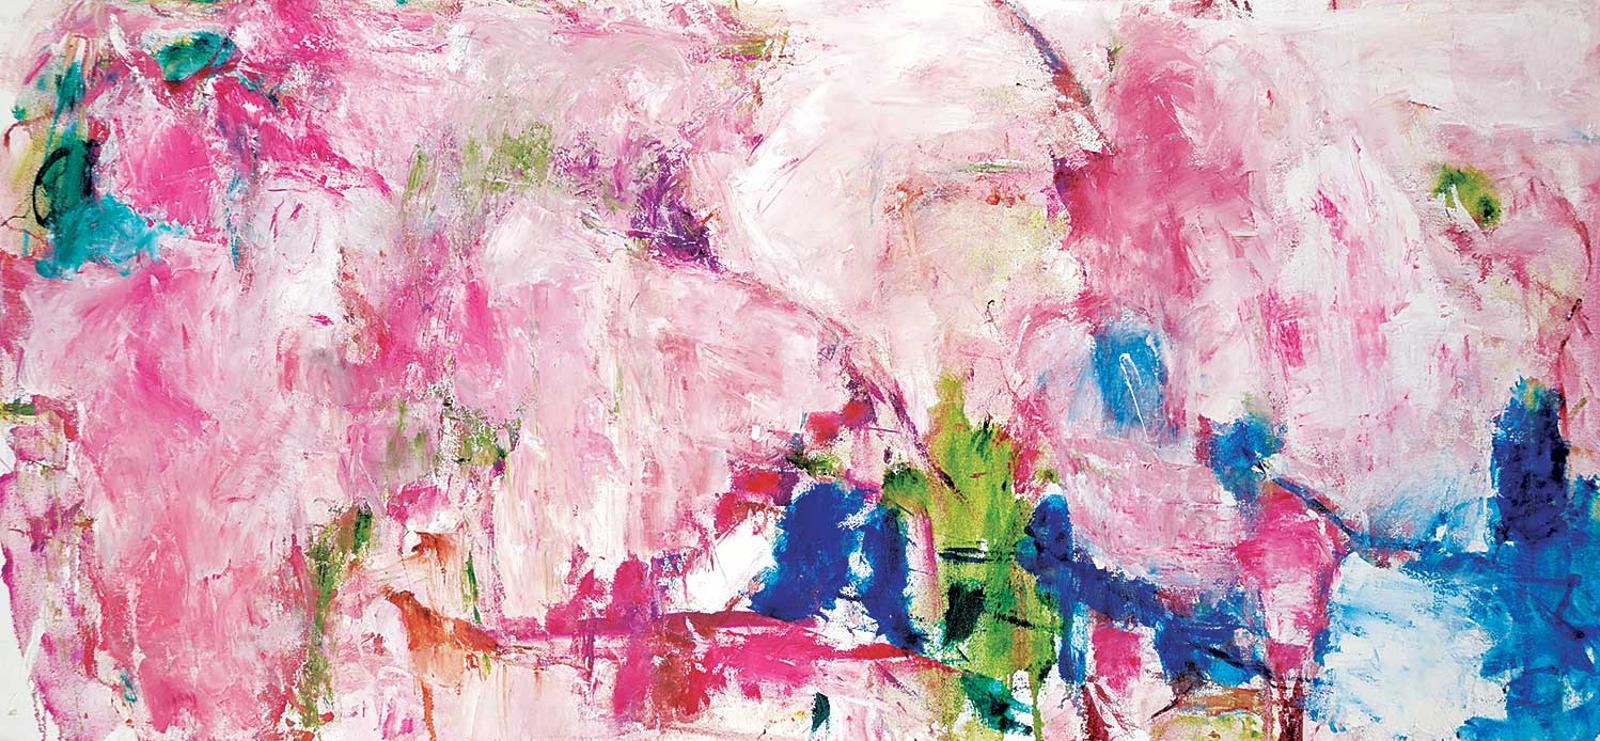 Maureen Fair - Untitled - Clouds of Abstract Pink